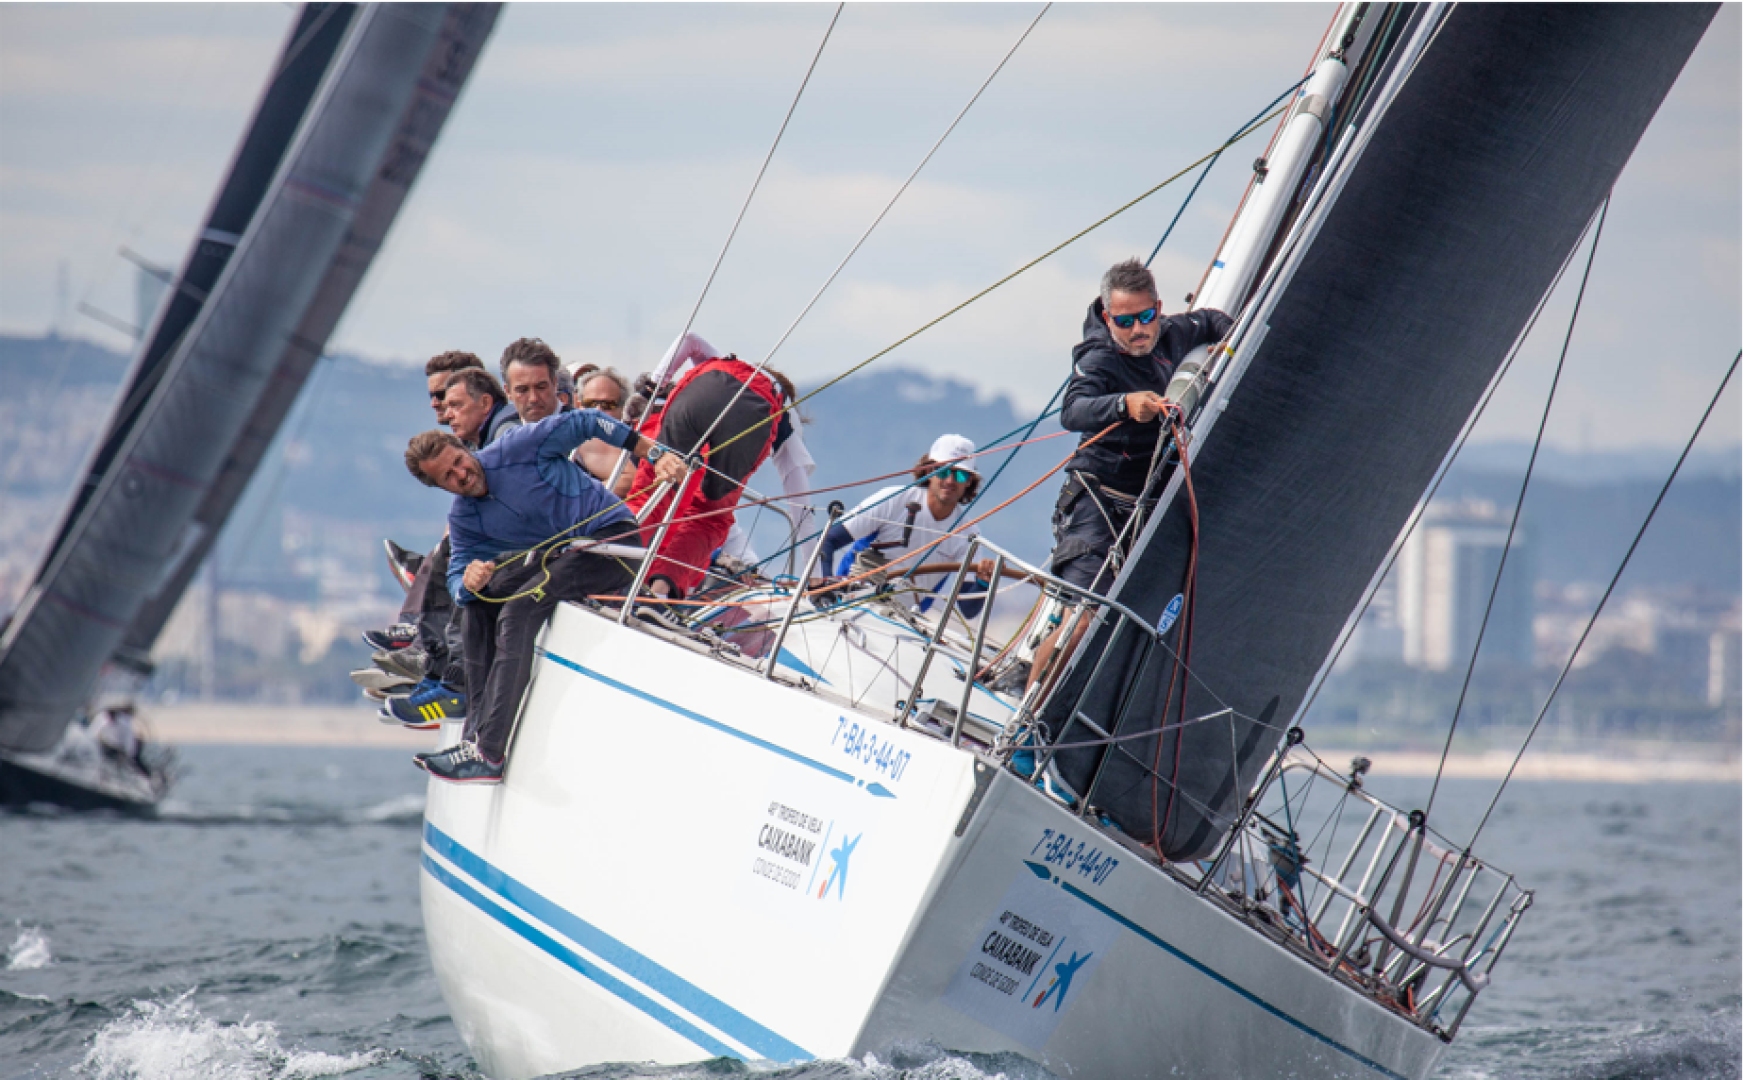 Rats on Fire takes its 13th Trophy at the 49 Godo Vela